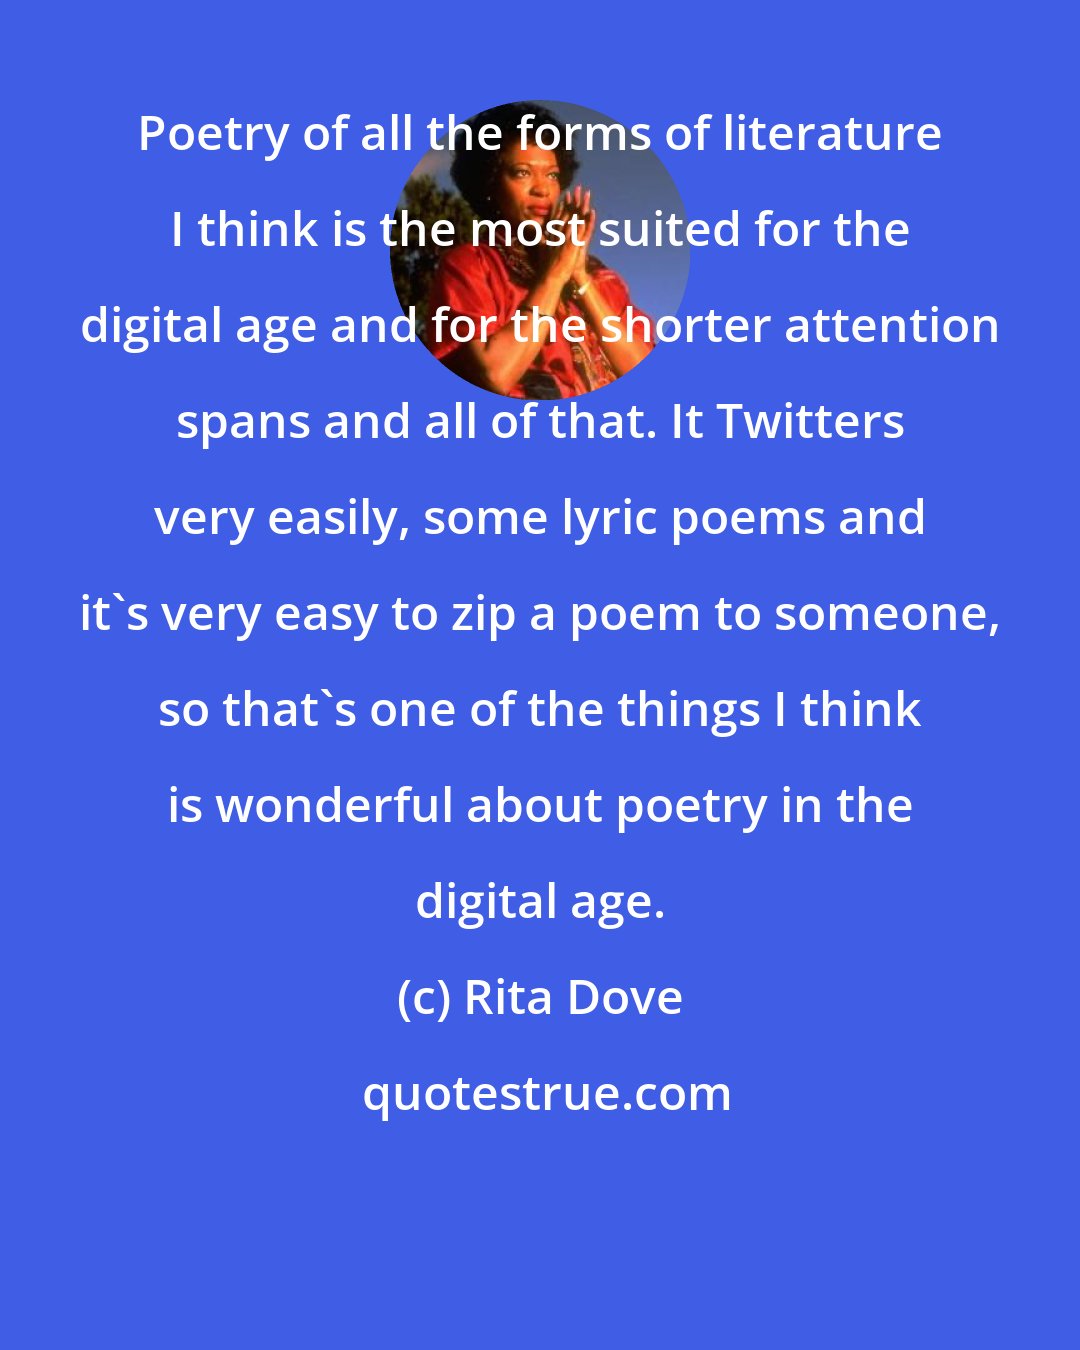 Rita Dove: Poetry of all the forms of literature I think is the most suited for the digital age and for the shorter attention spans and all of that. It Twitters very easily, some lyric poems and it's very easy to zip a poem to someone, so that's one of the things I think is wonderful about poetry in the digital age.